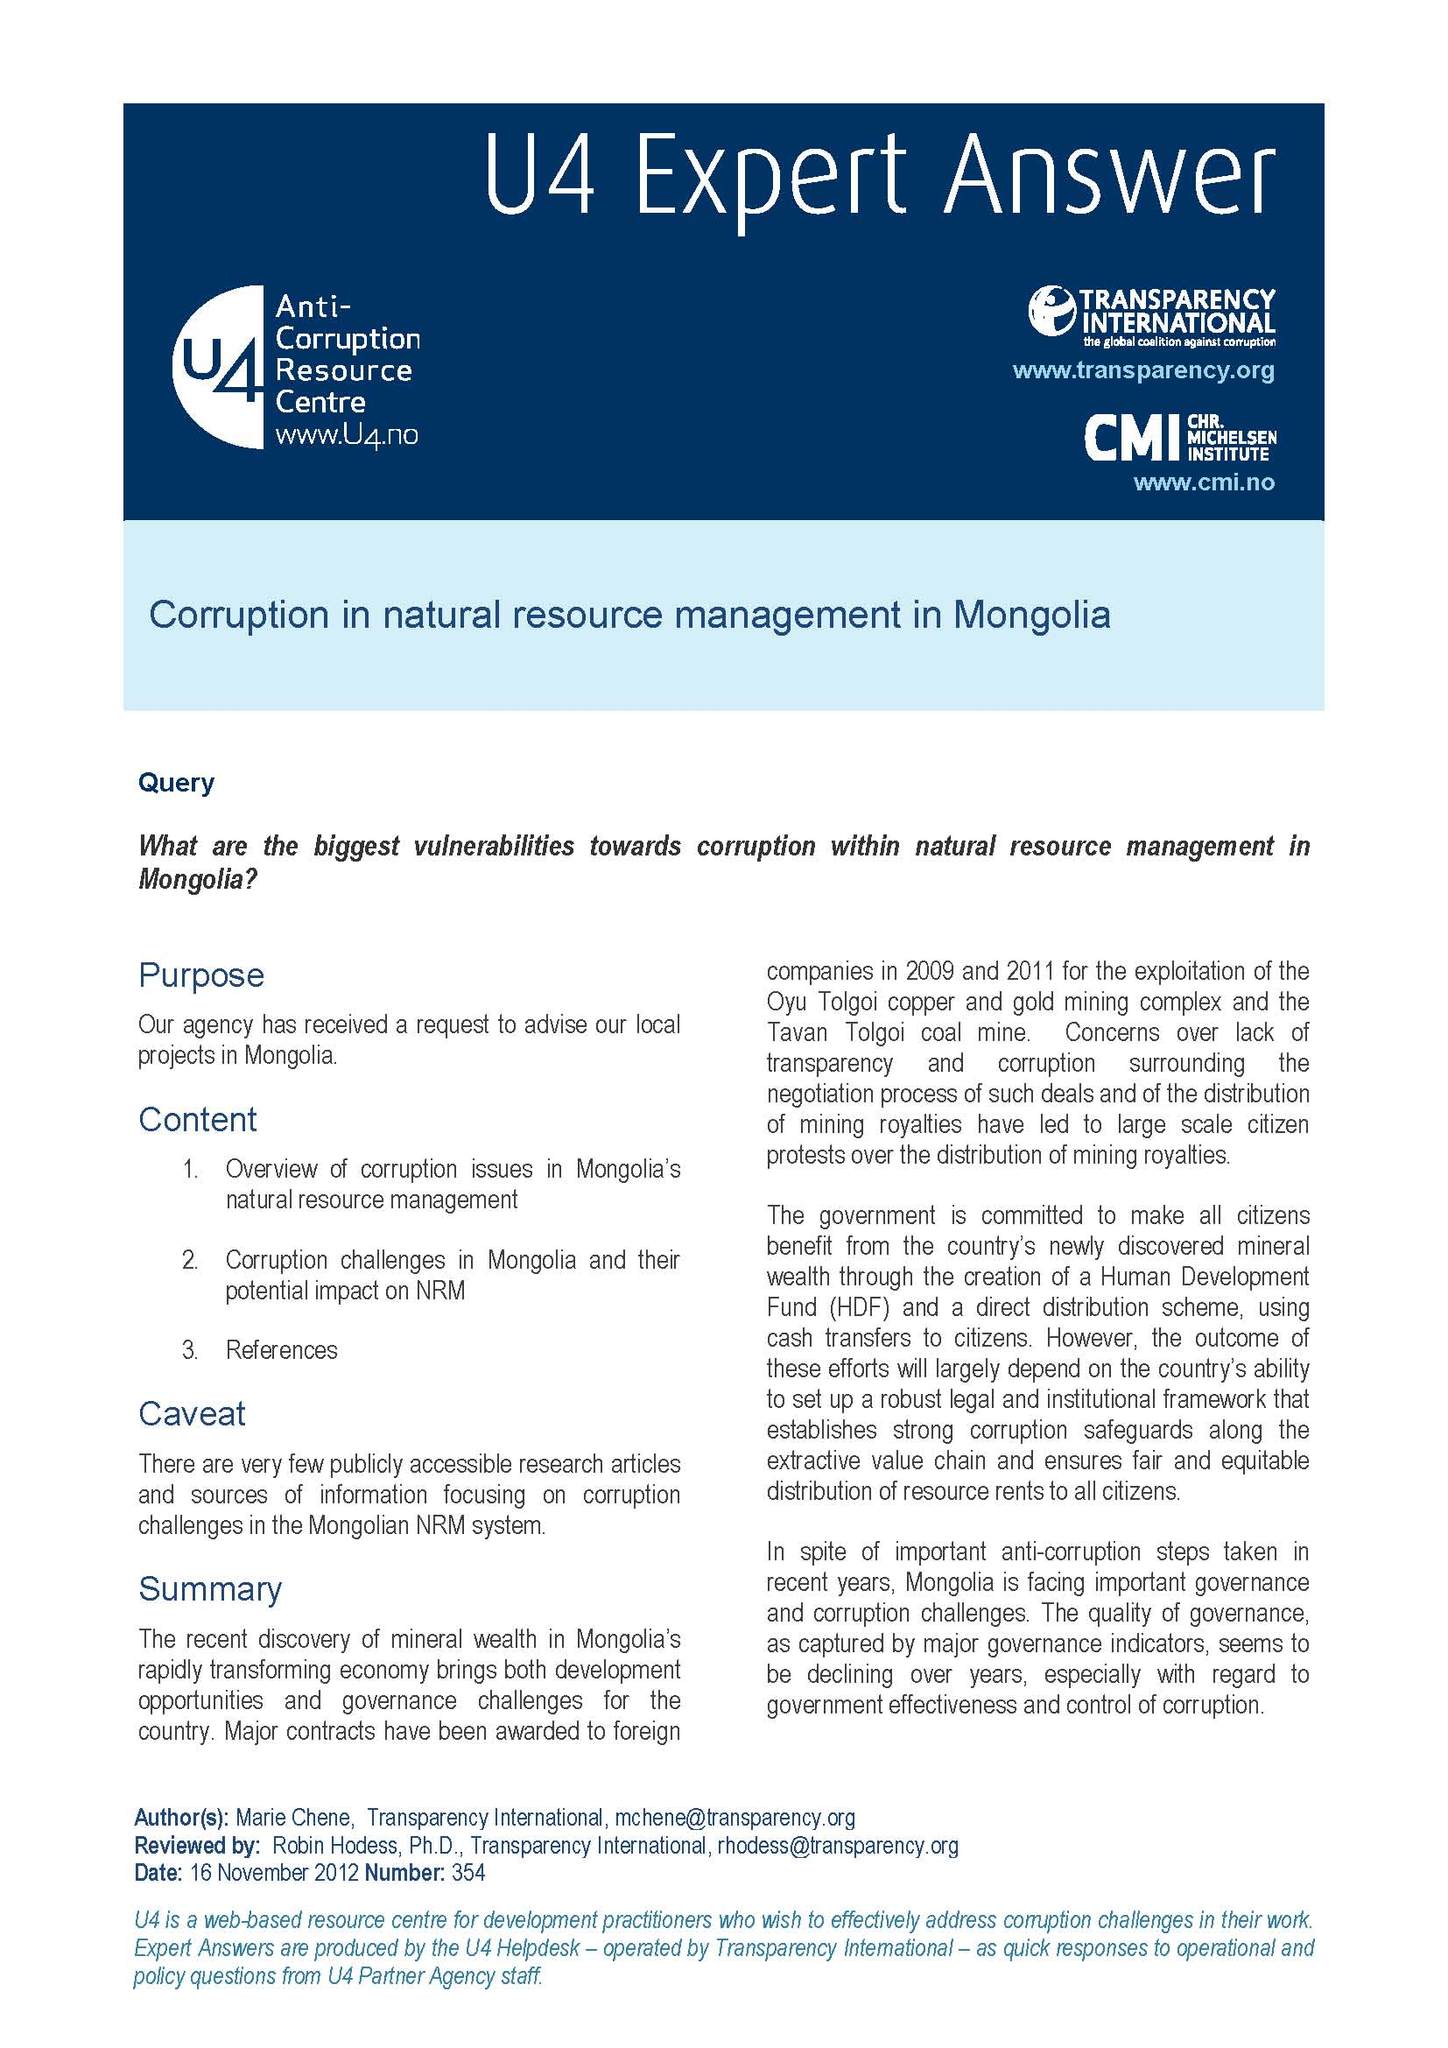 Corruption in natural resource management in Mongolia